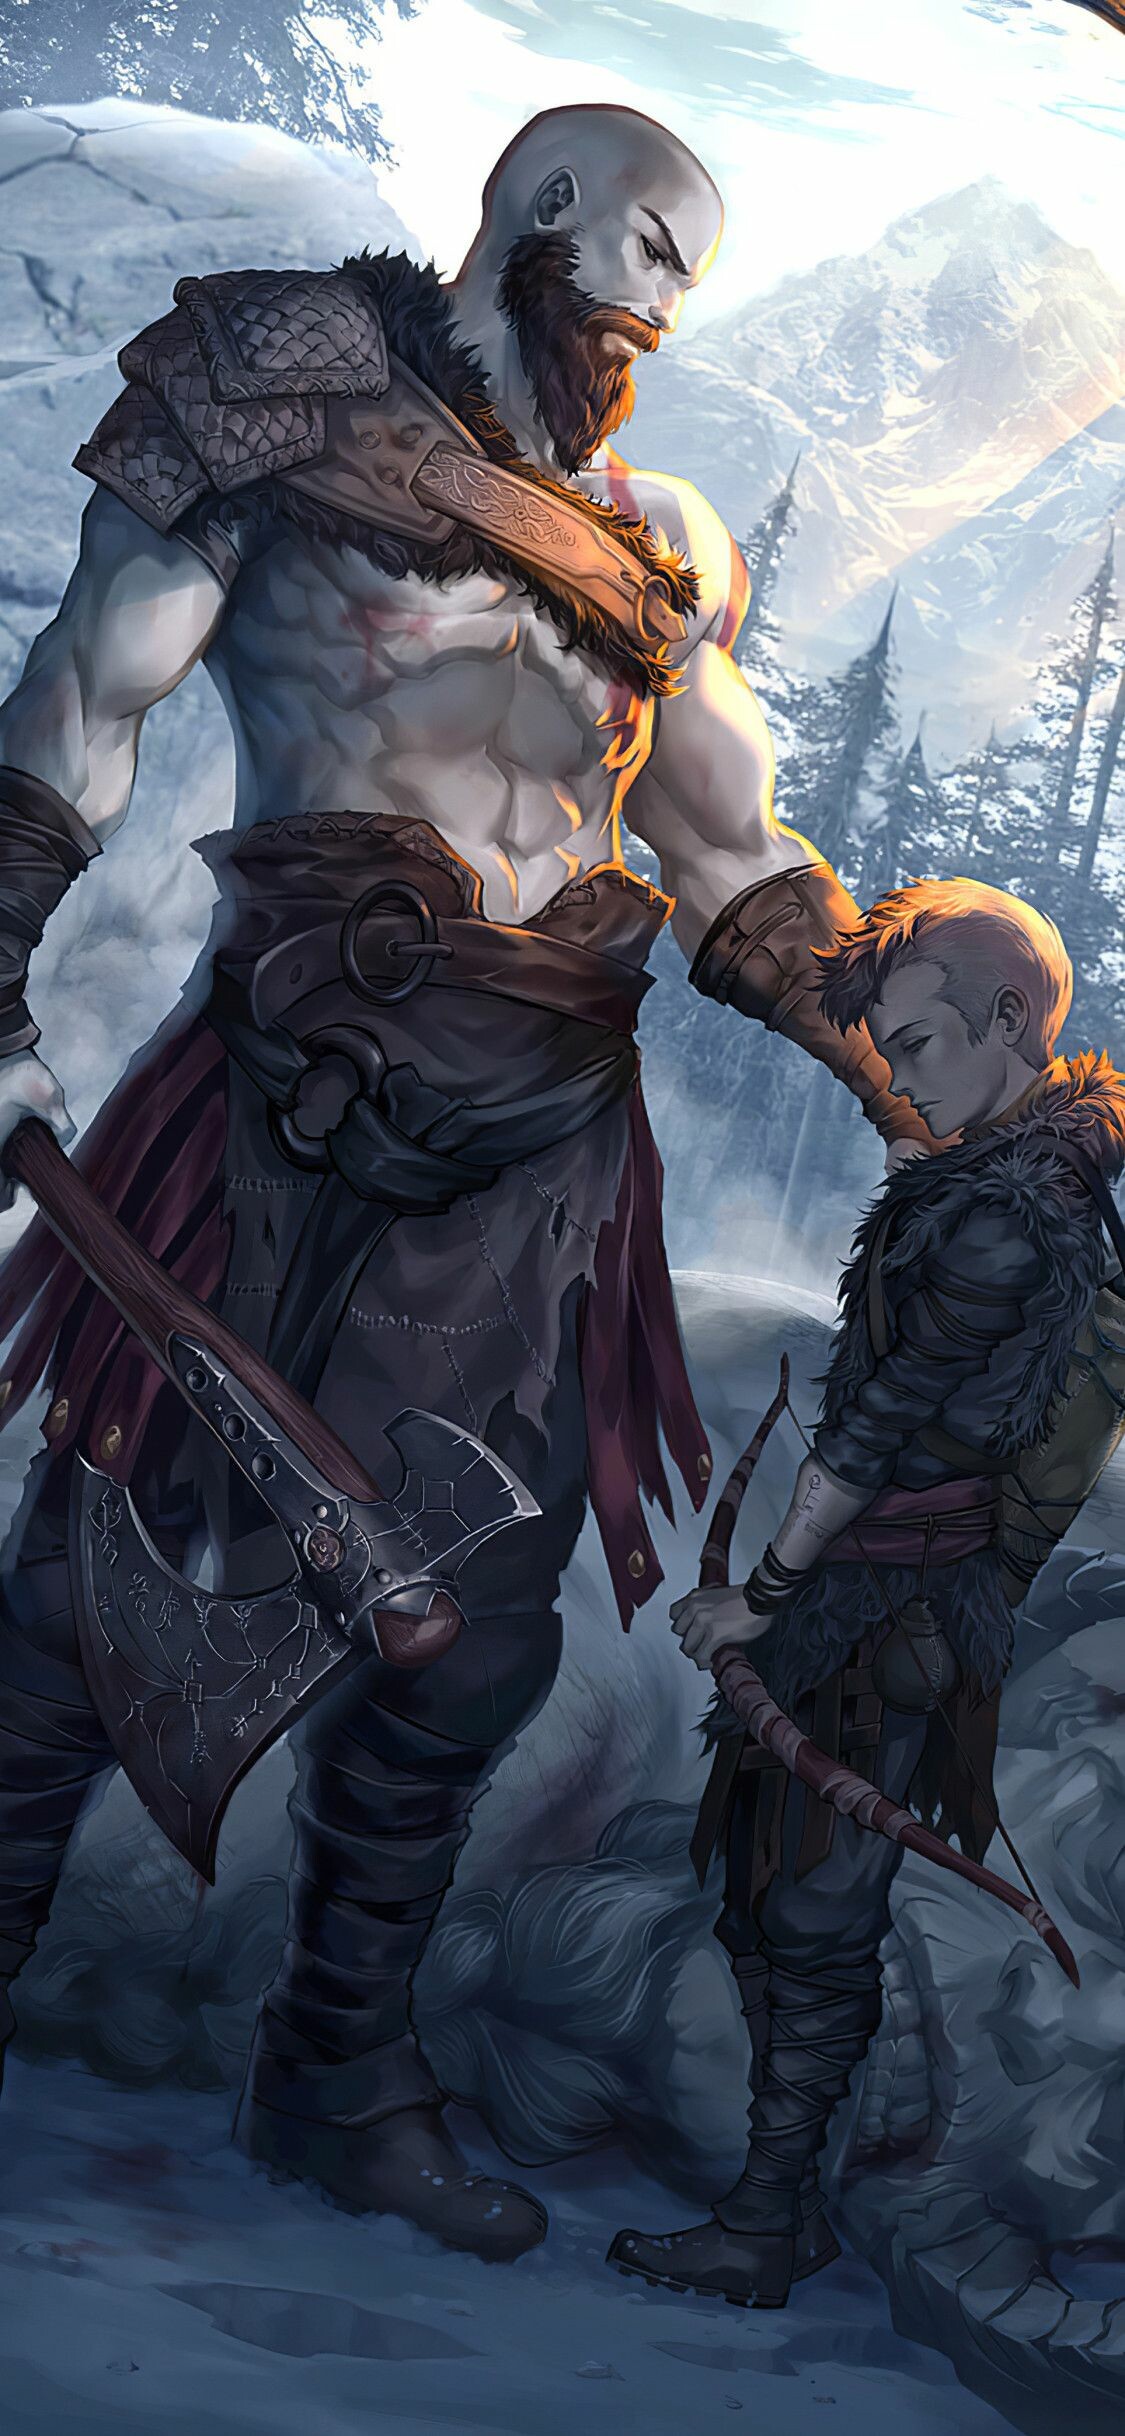 God of War: Kratos and Atreus, The young son that Kratos bore with the giant named Faye and has the ability to telepathically hear the thoughts of other beings. 1130x2440 HD Background.